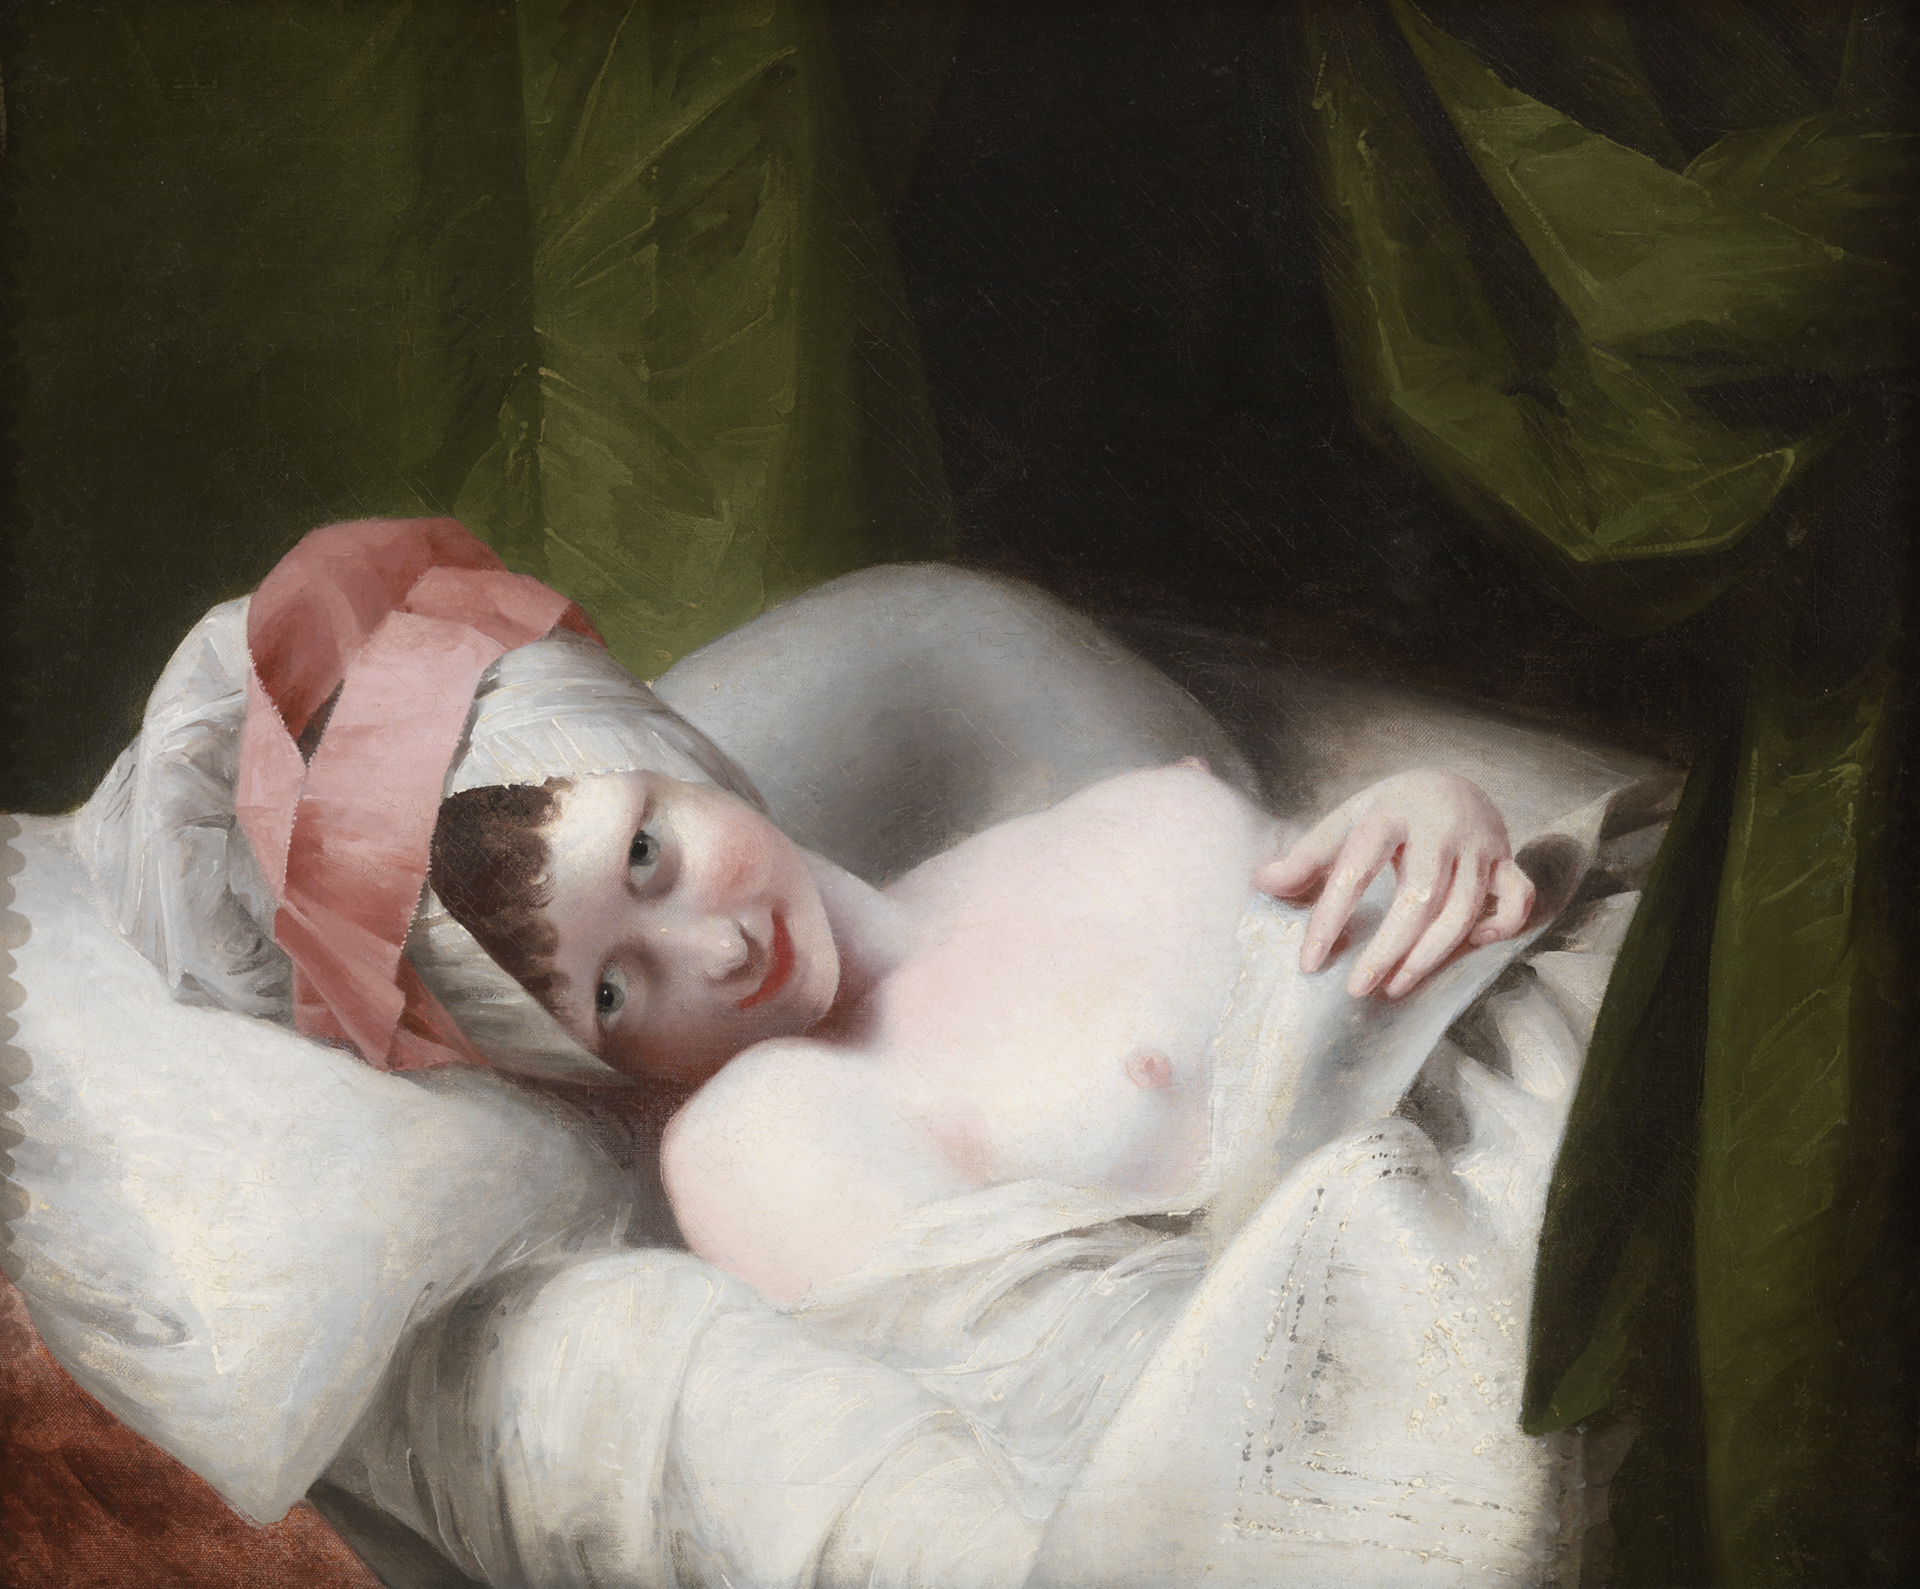 Painting of a very light-skinned young woman, lying in bed, making intense, suggestive eye contact with the viewer. Her breasts are exposed and she wears a pink and white headcovering.